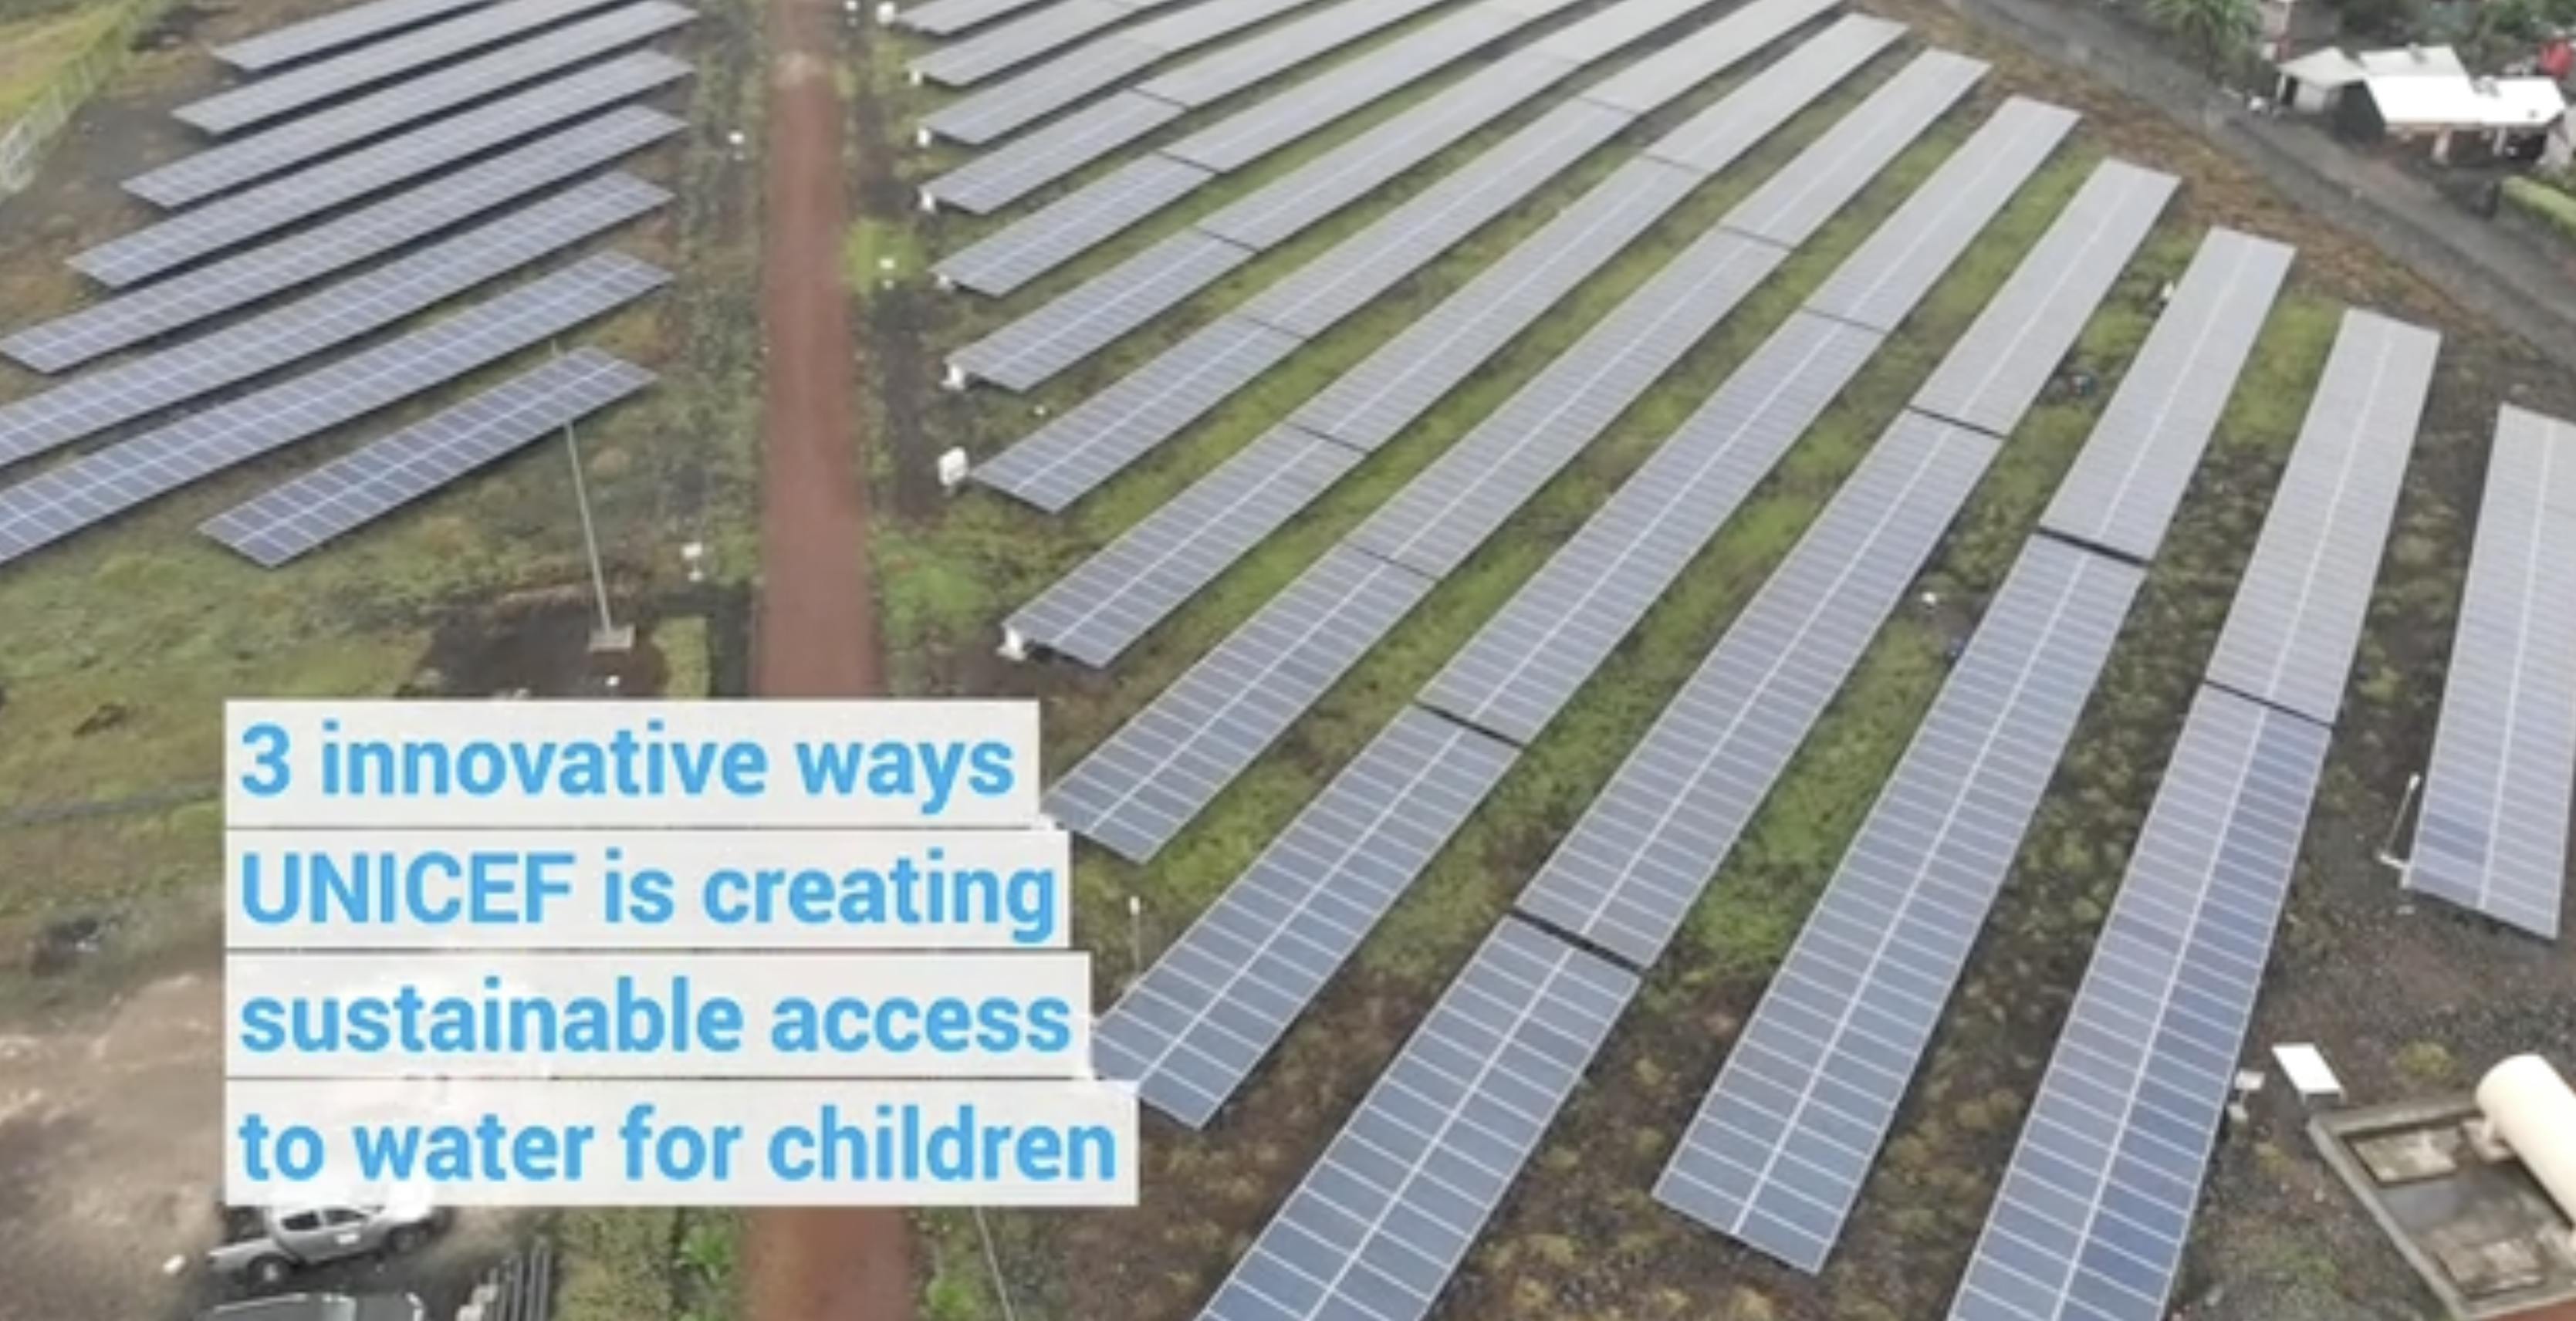 Global Parent- 3 innovative ways UNICEF is creating sustainable access to water for children